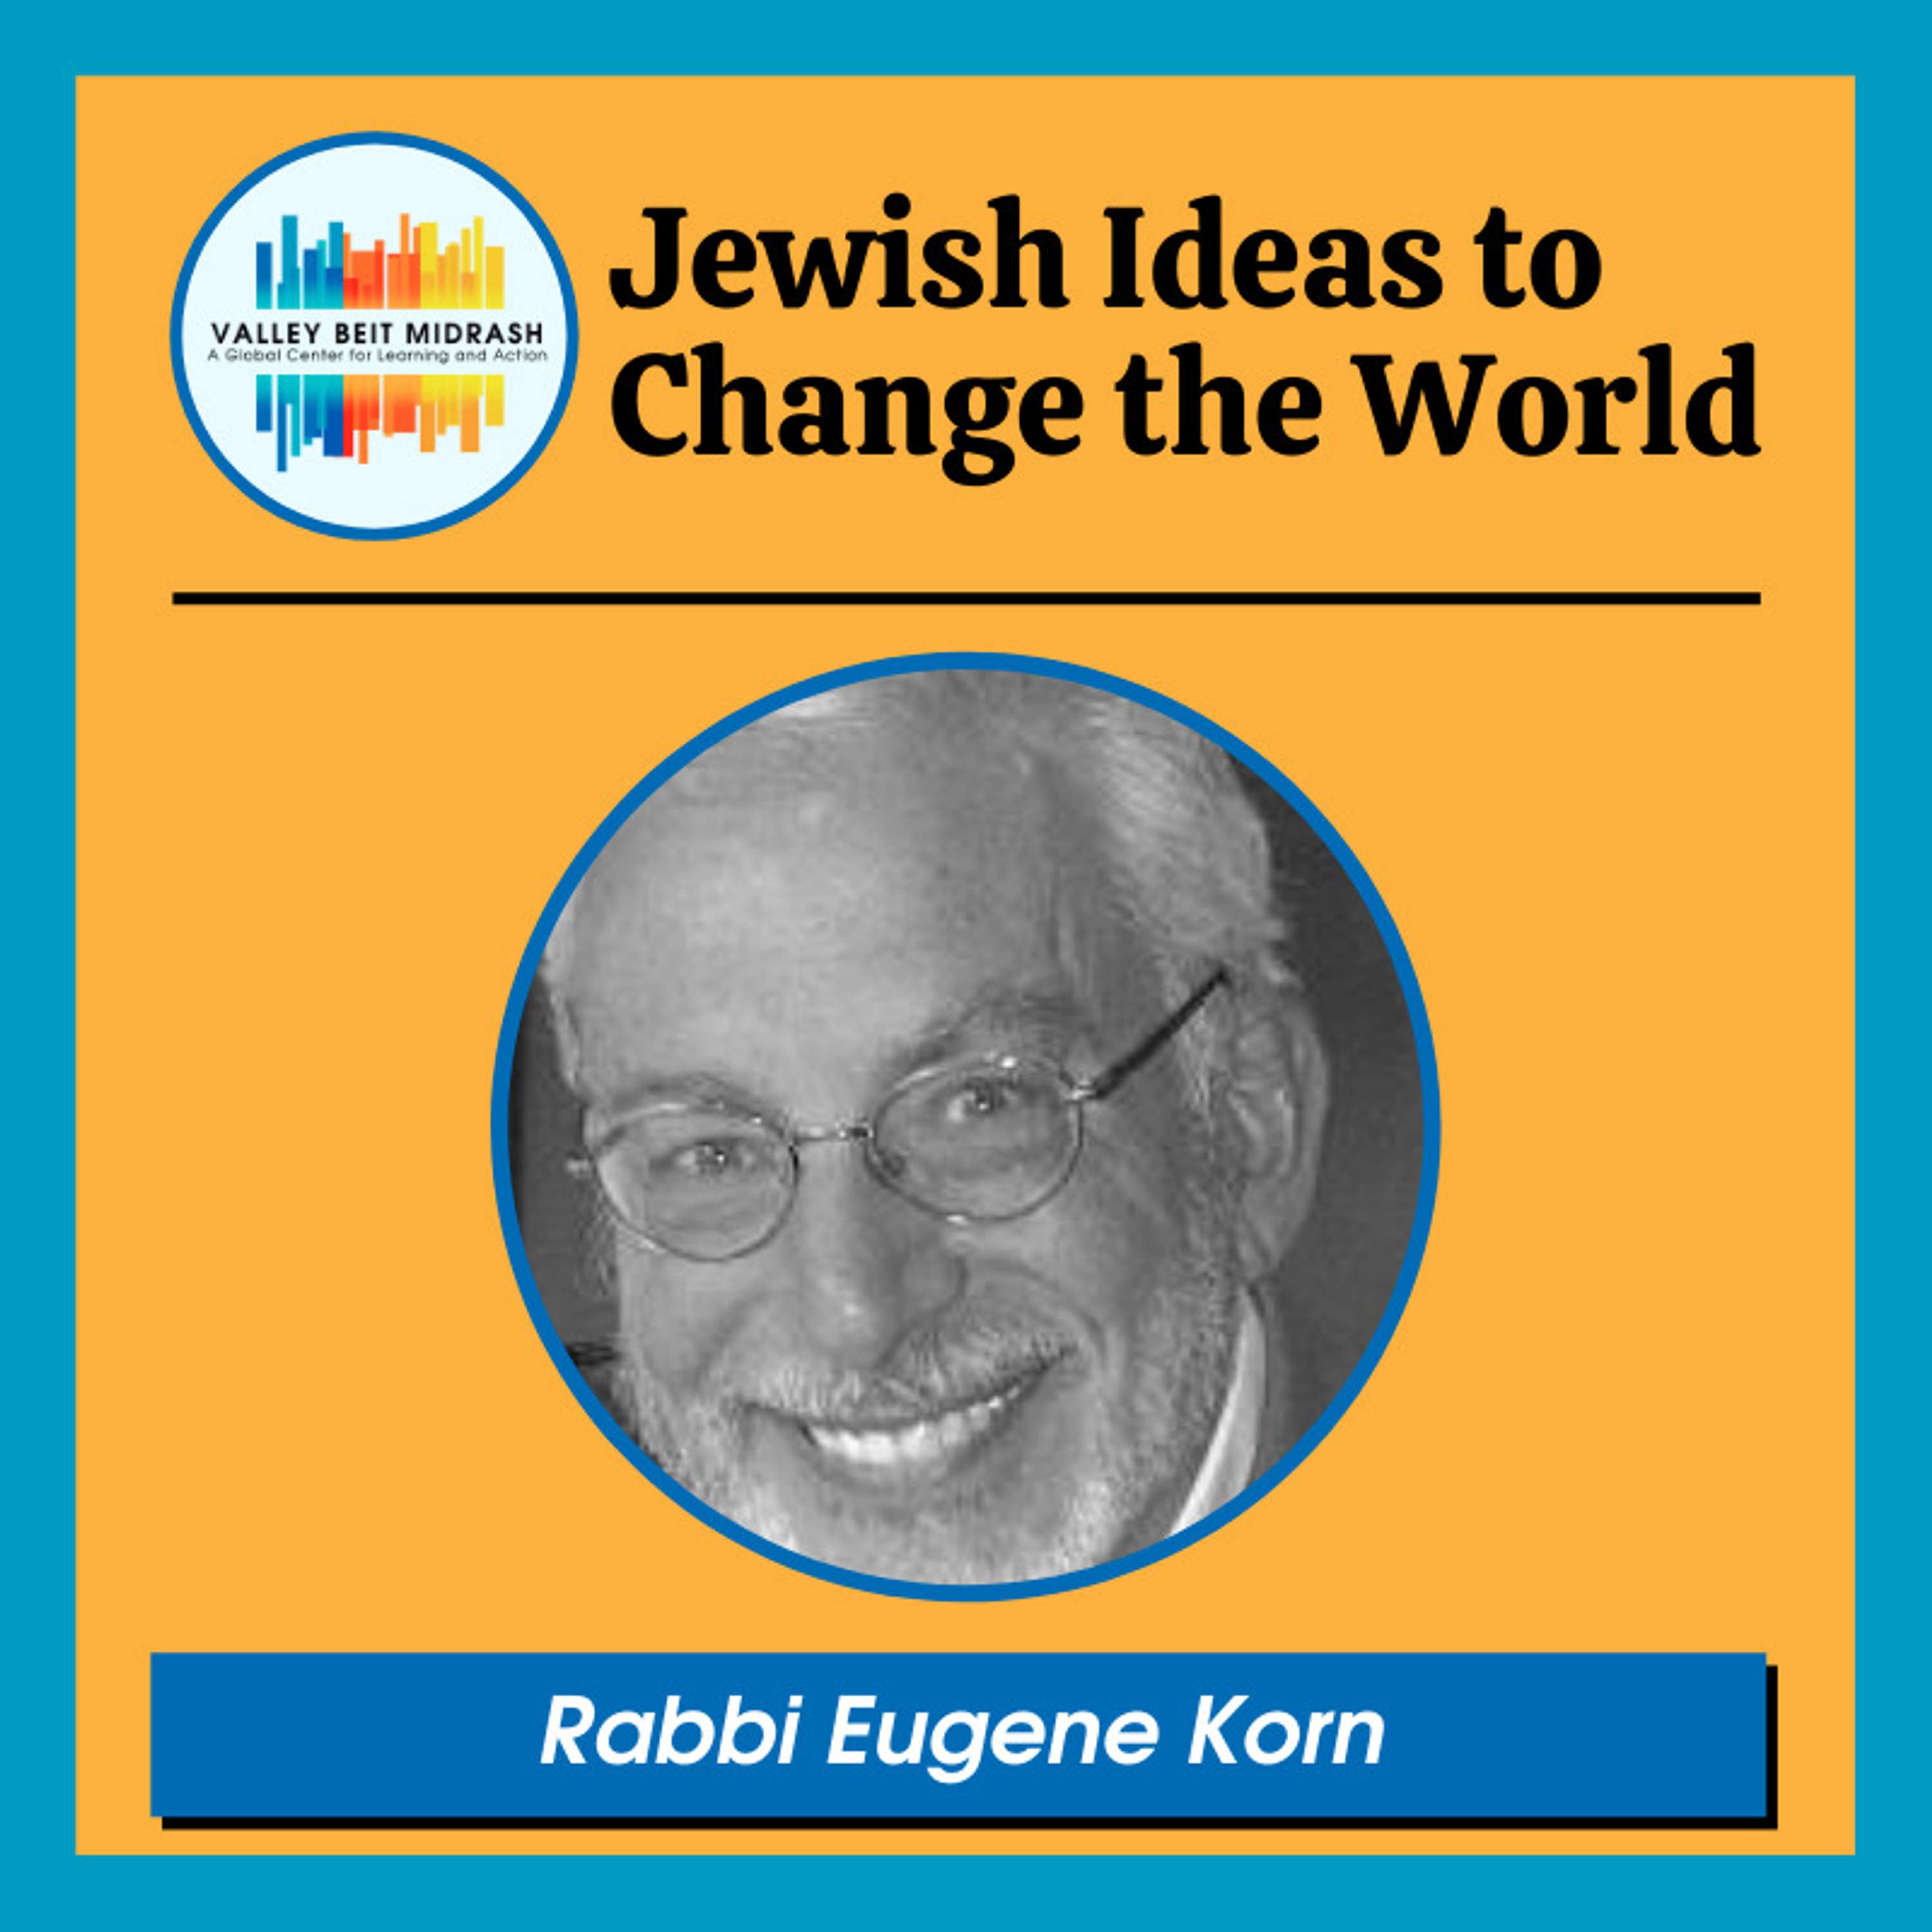 To Be a Holy People, Jewish Tradition and Ethical Values – Rabbi Eugene Korn